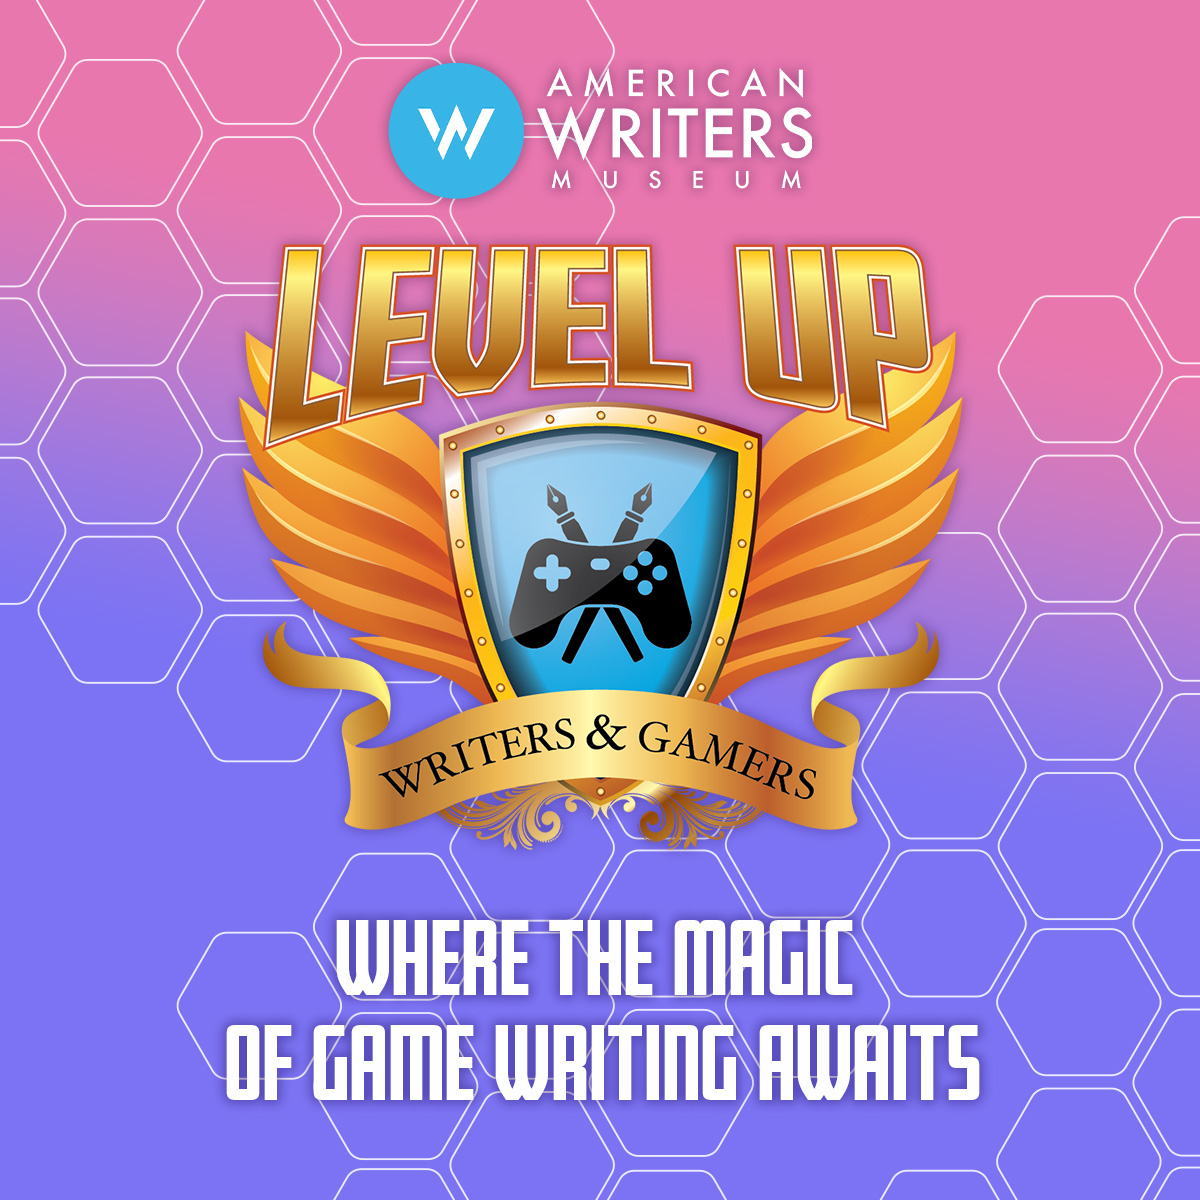 On May 24, a new exhibit opens at the @AWMuseum all about game writing! At Level Up: Writers & Gamers, visitors can explore the role of narrative and storytelling in gaming, from the advent of Dungeons & Dragons to immersive video games of today! americanwritersmuseum.org/level-up-write…